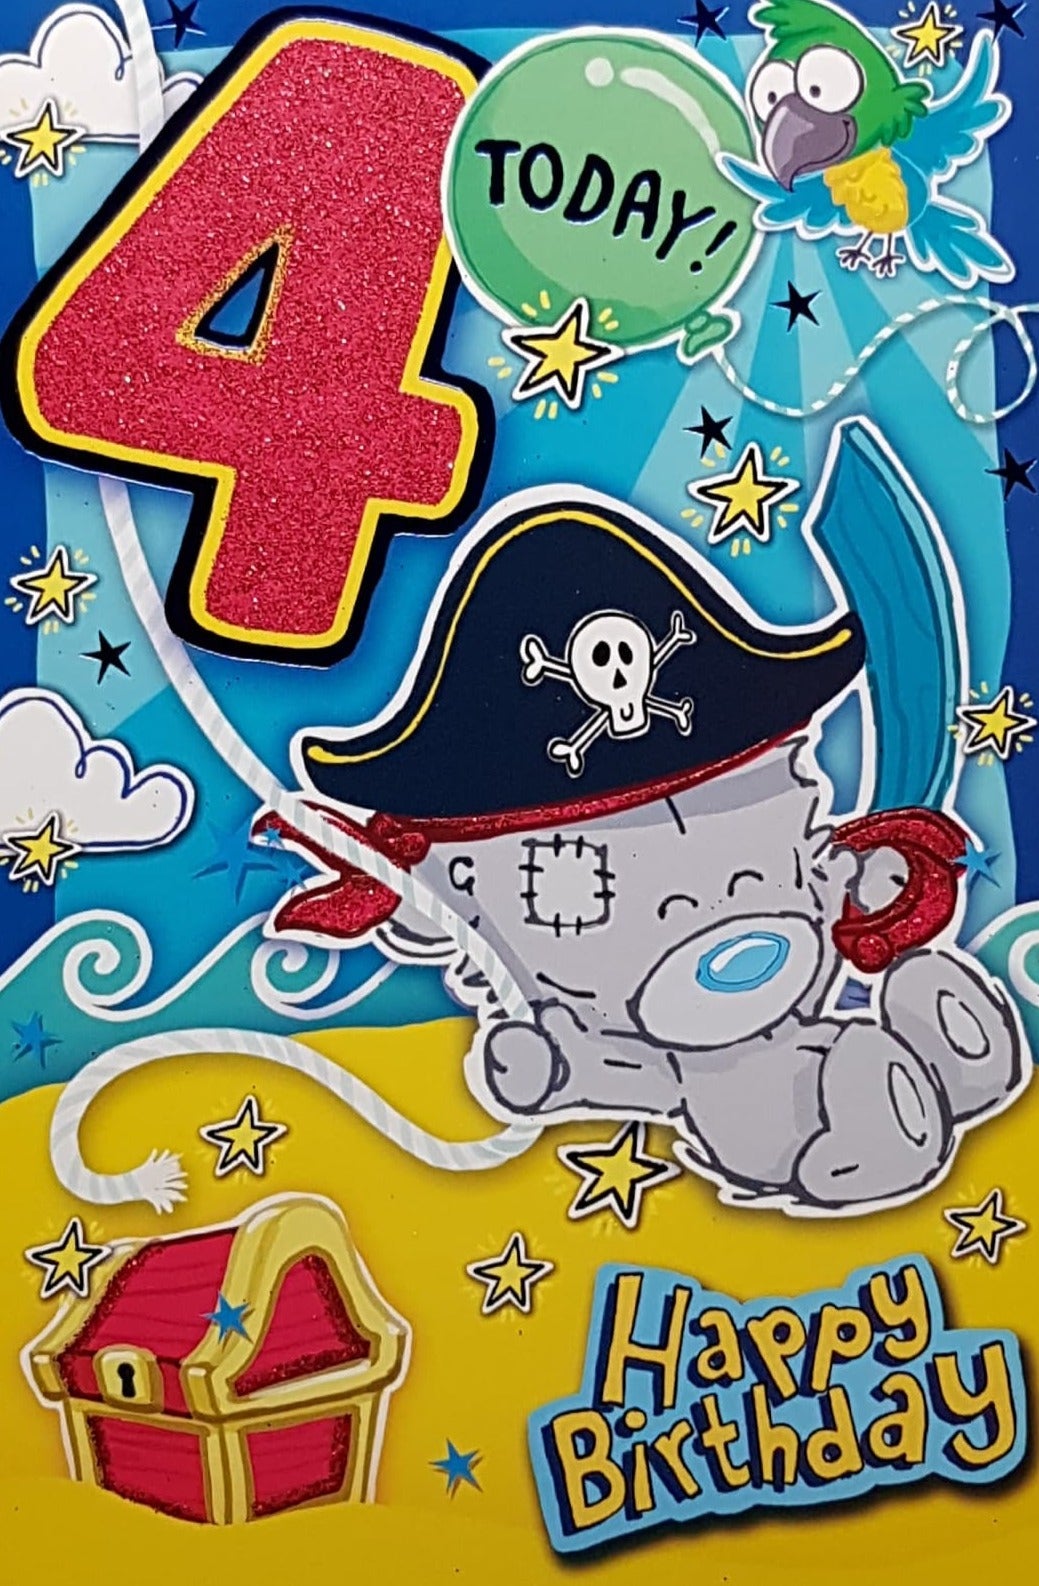 Age 4 Birthday Card - Pirate Teddy On Island With A Treasure Chest